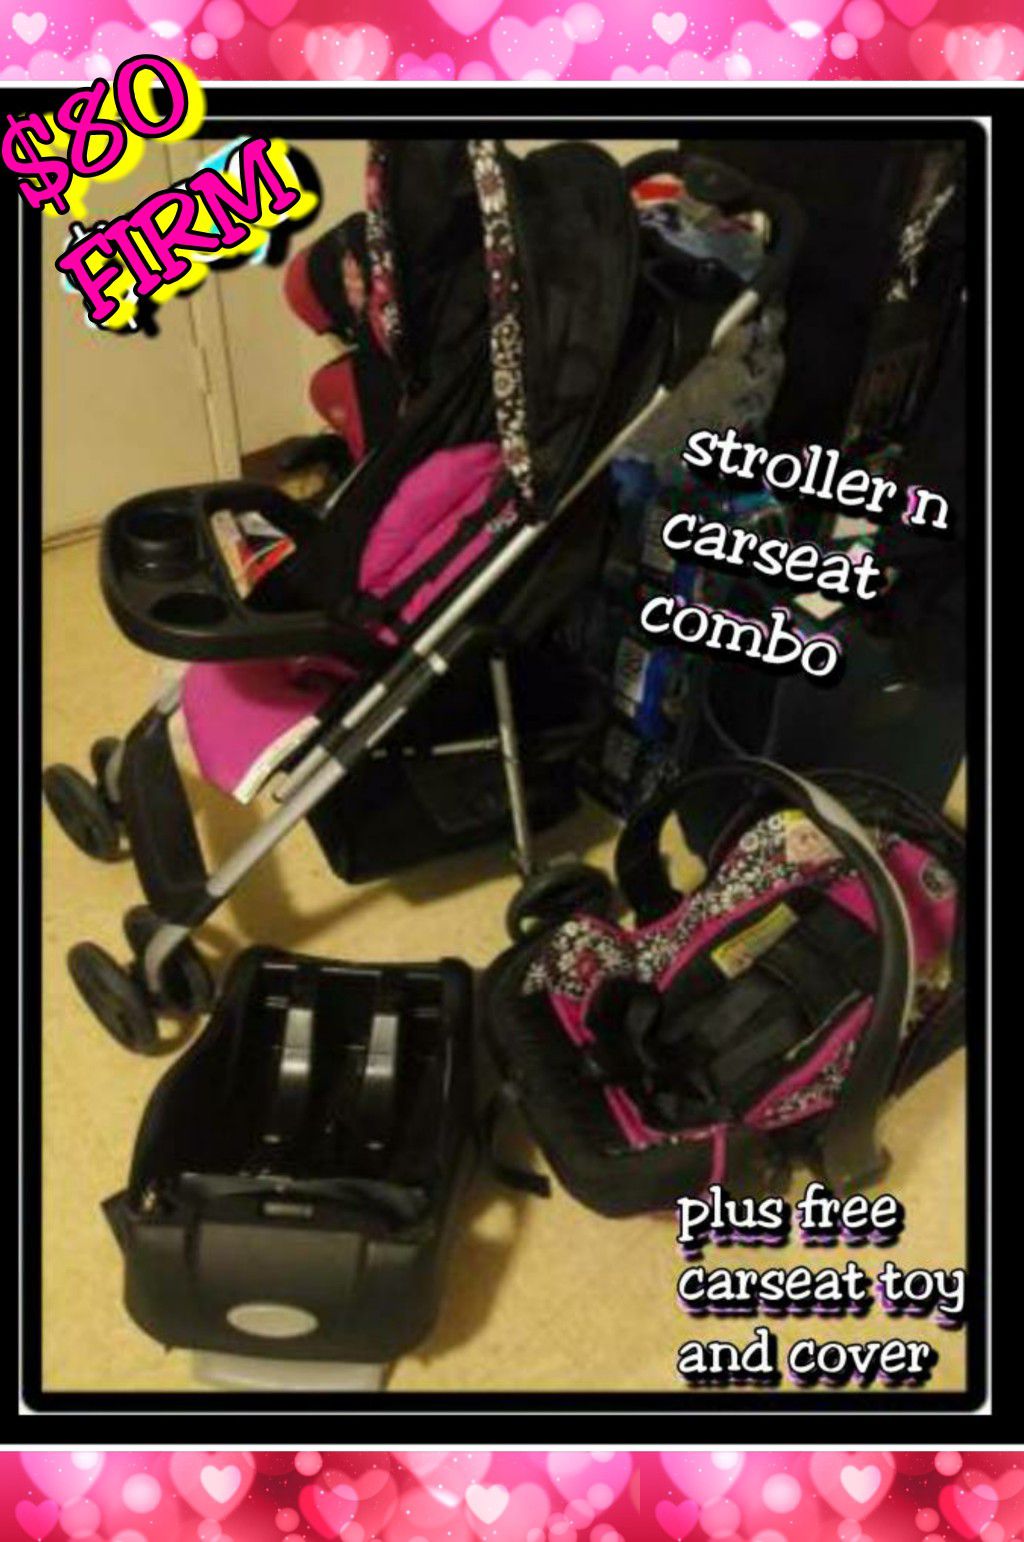 Carseat stroller combo